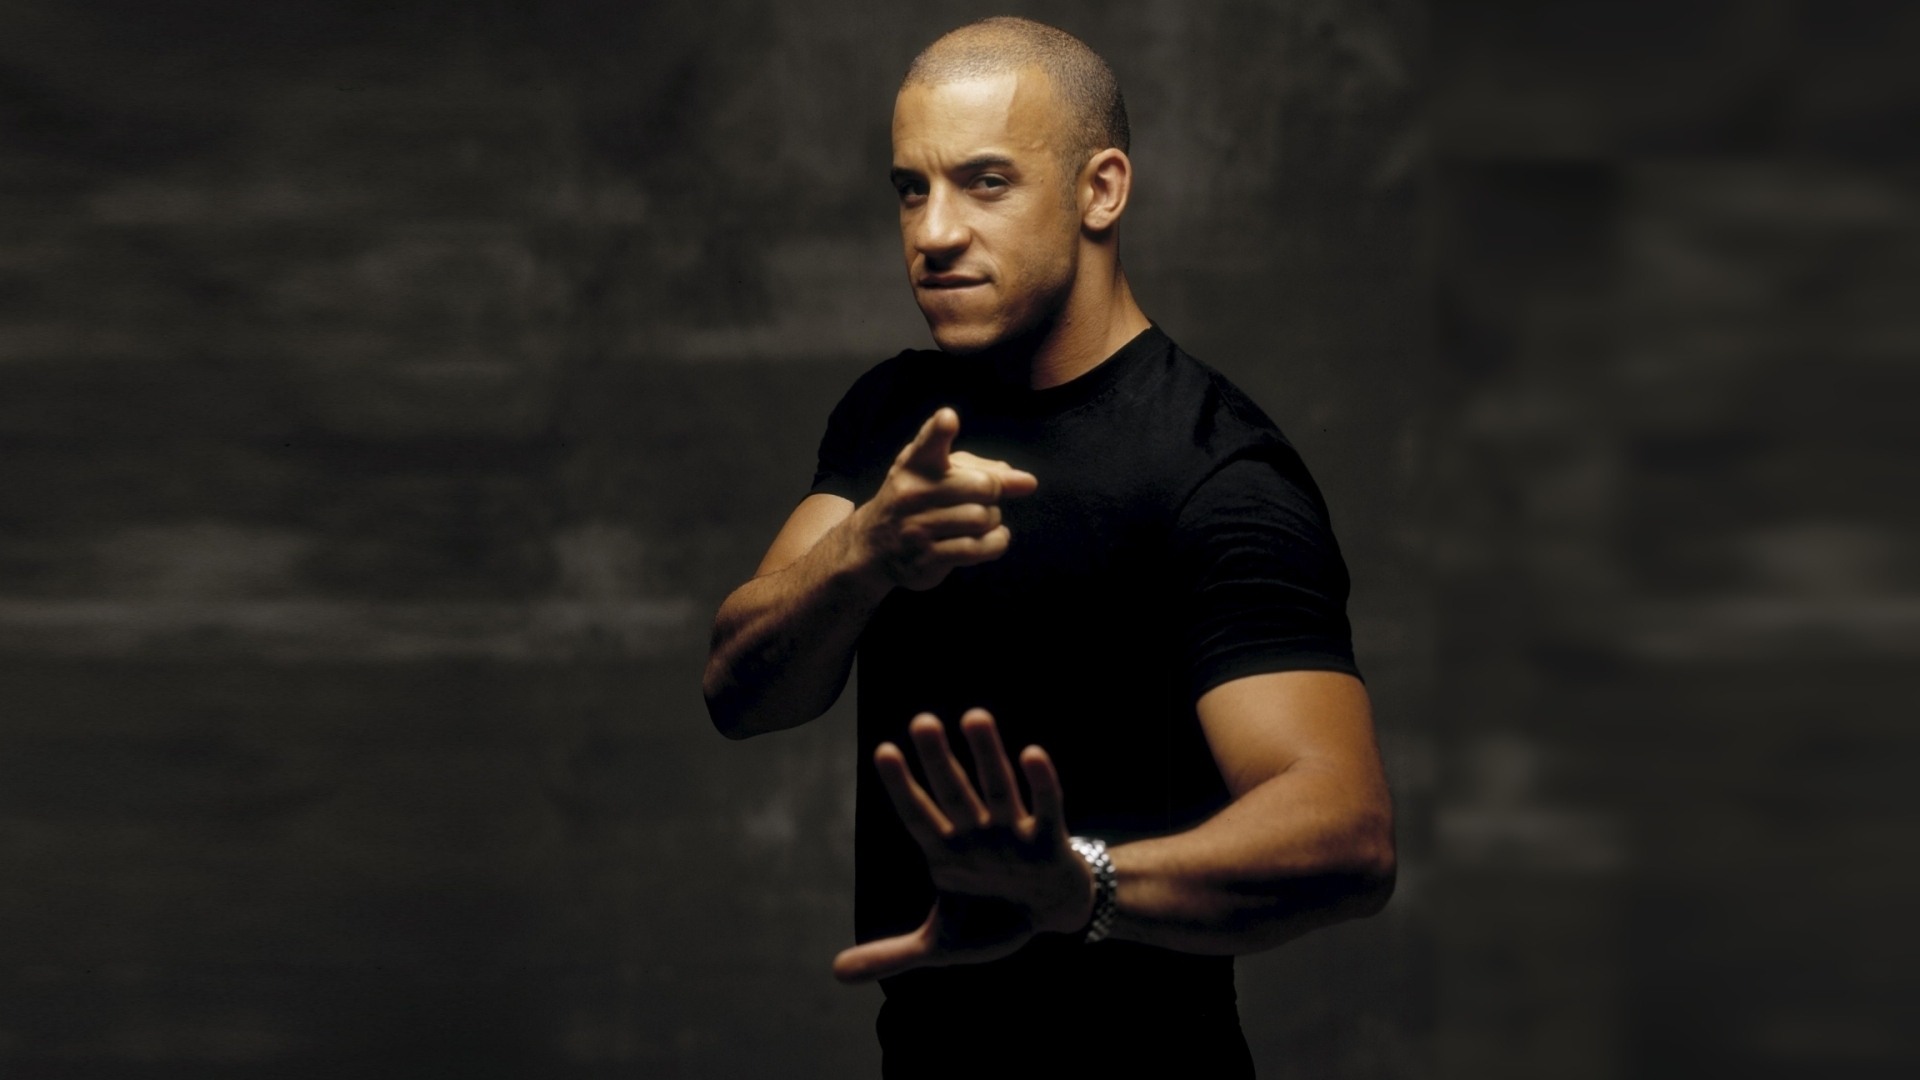 Hollywood Actor Vin Diesel Wallpaper And Image